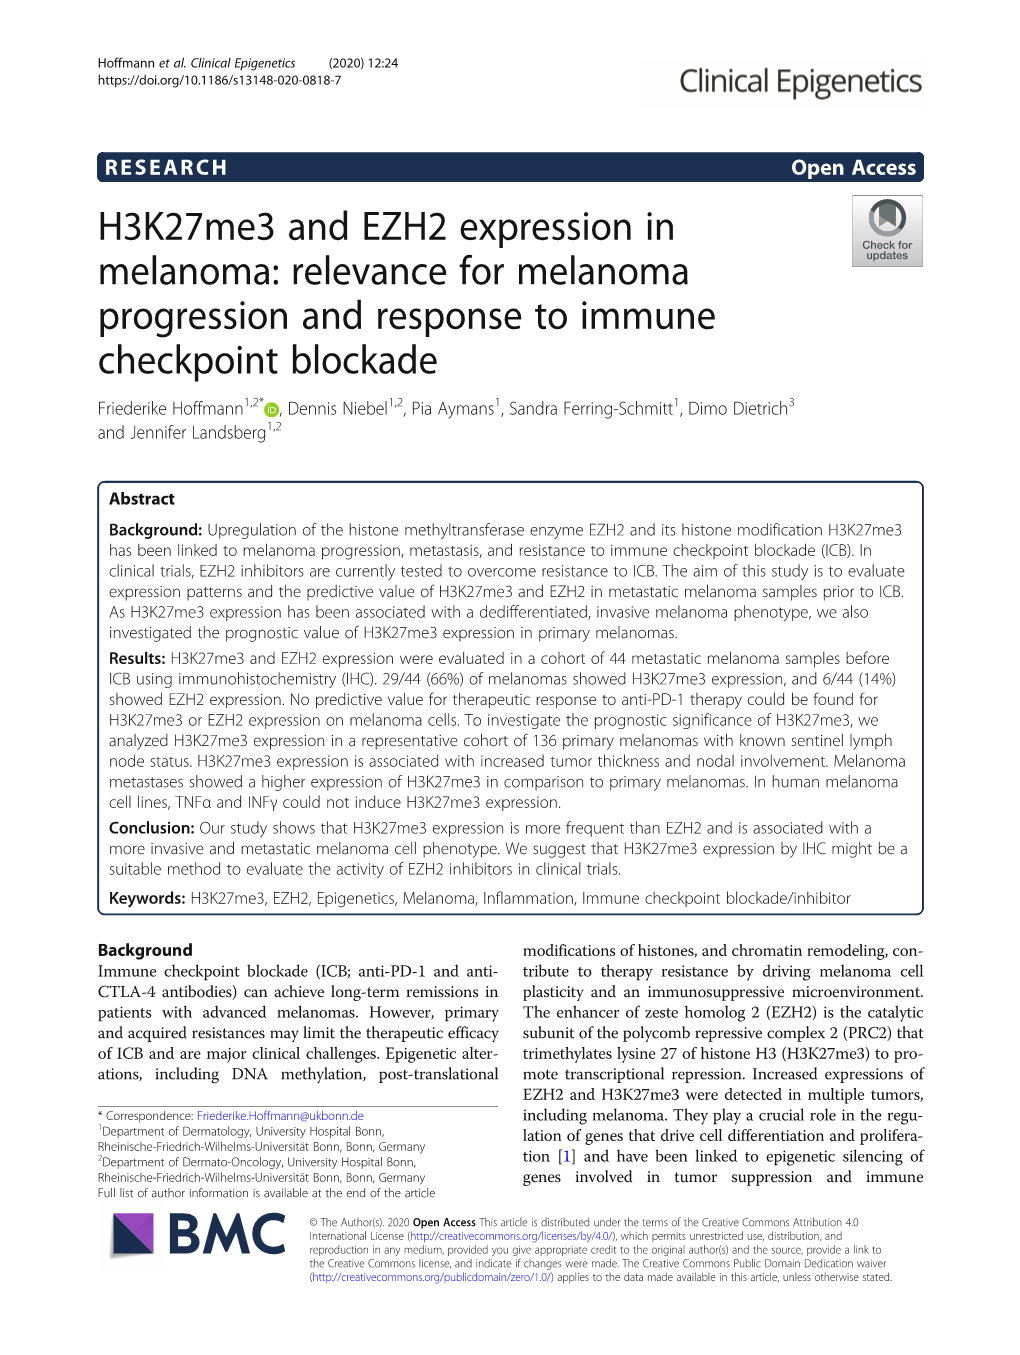 H3k27me3 and EZH2 Expression in Melanoma